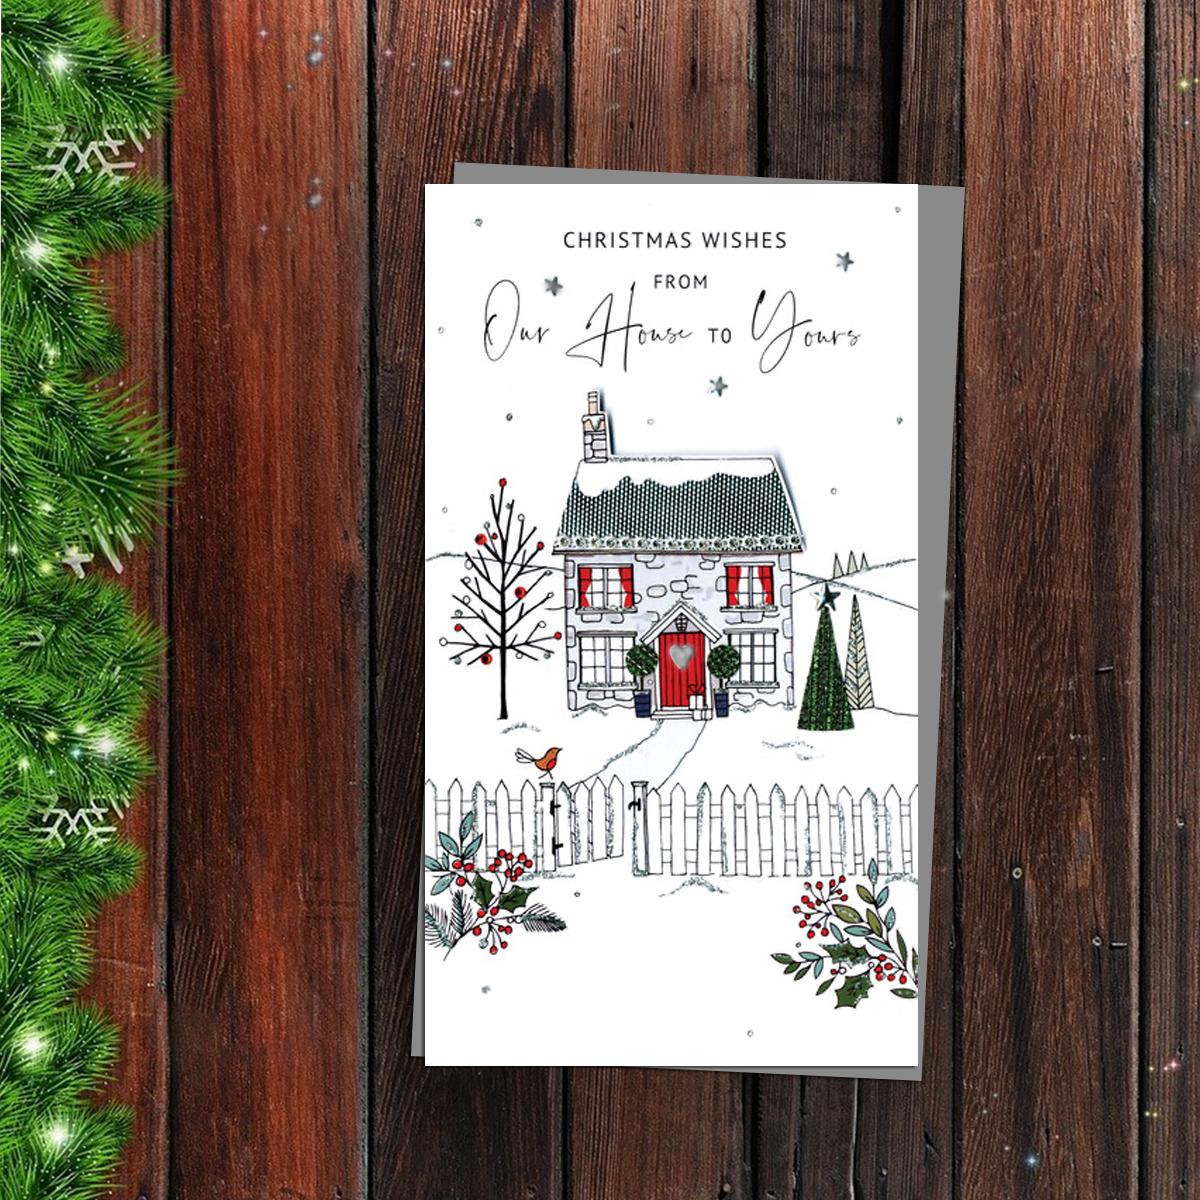 Our House To Yours Christmas Card Alongside Its Silver Envelope